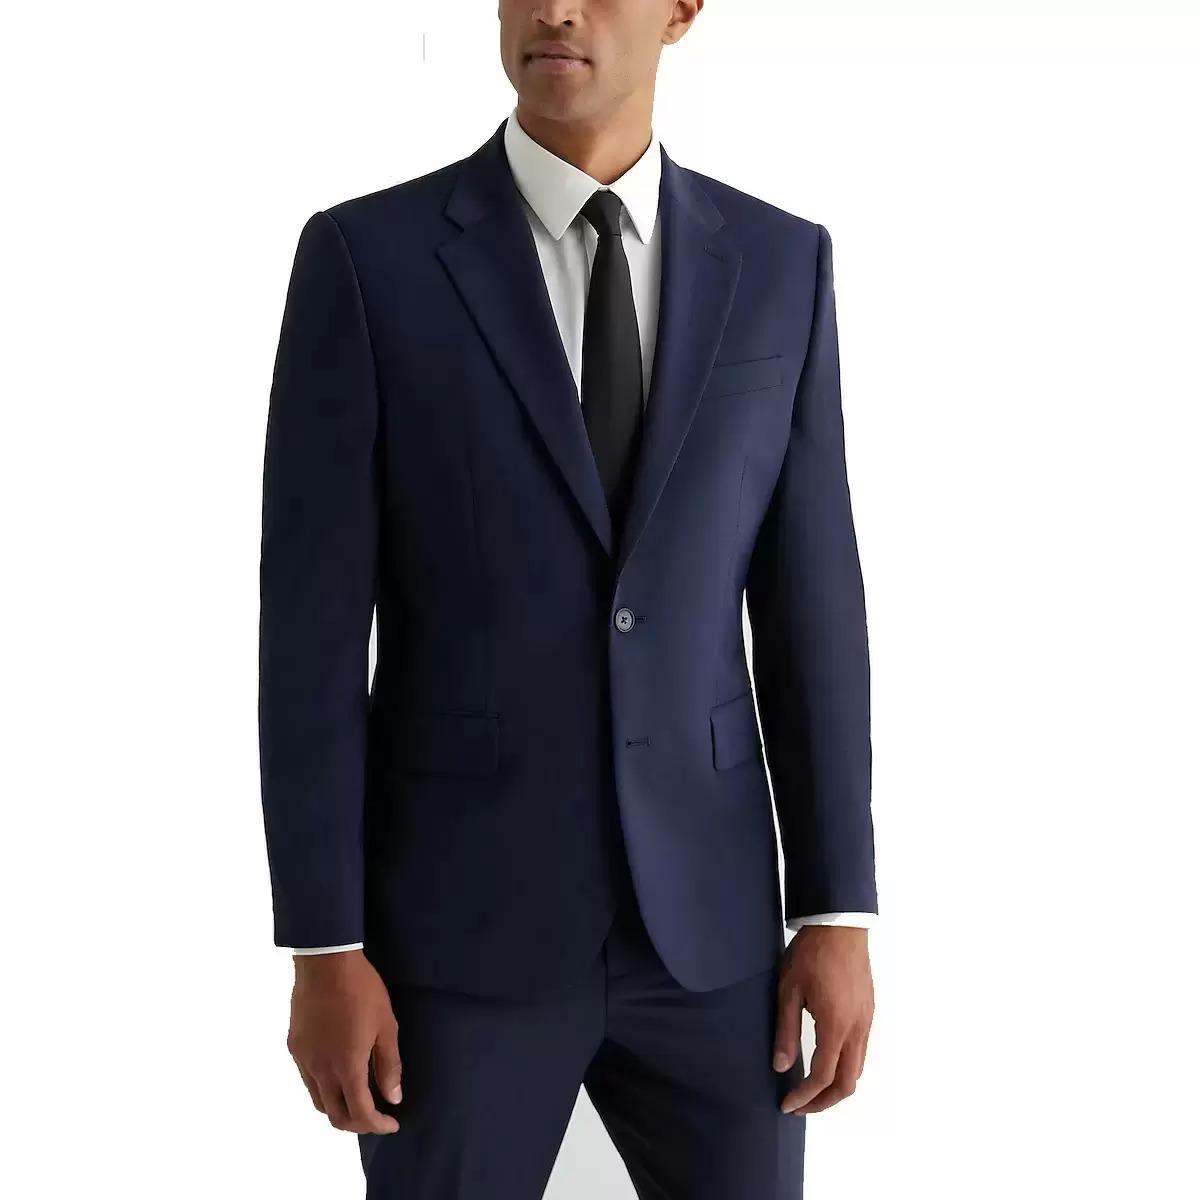 Express Full Wool Cotton Blend Suit Set for $149 Shipped